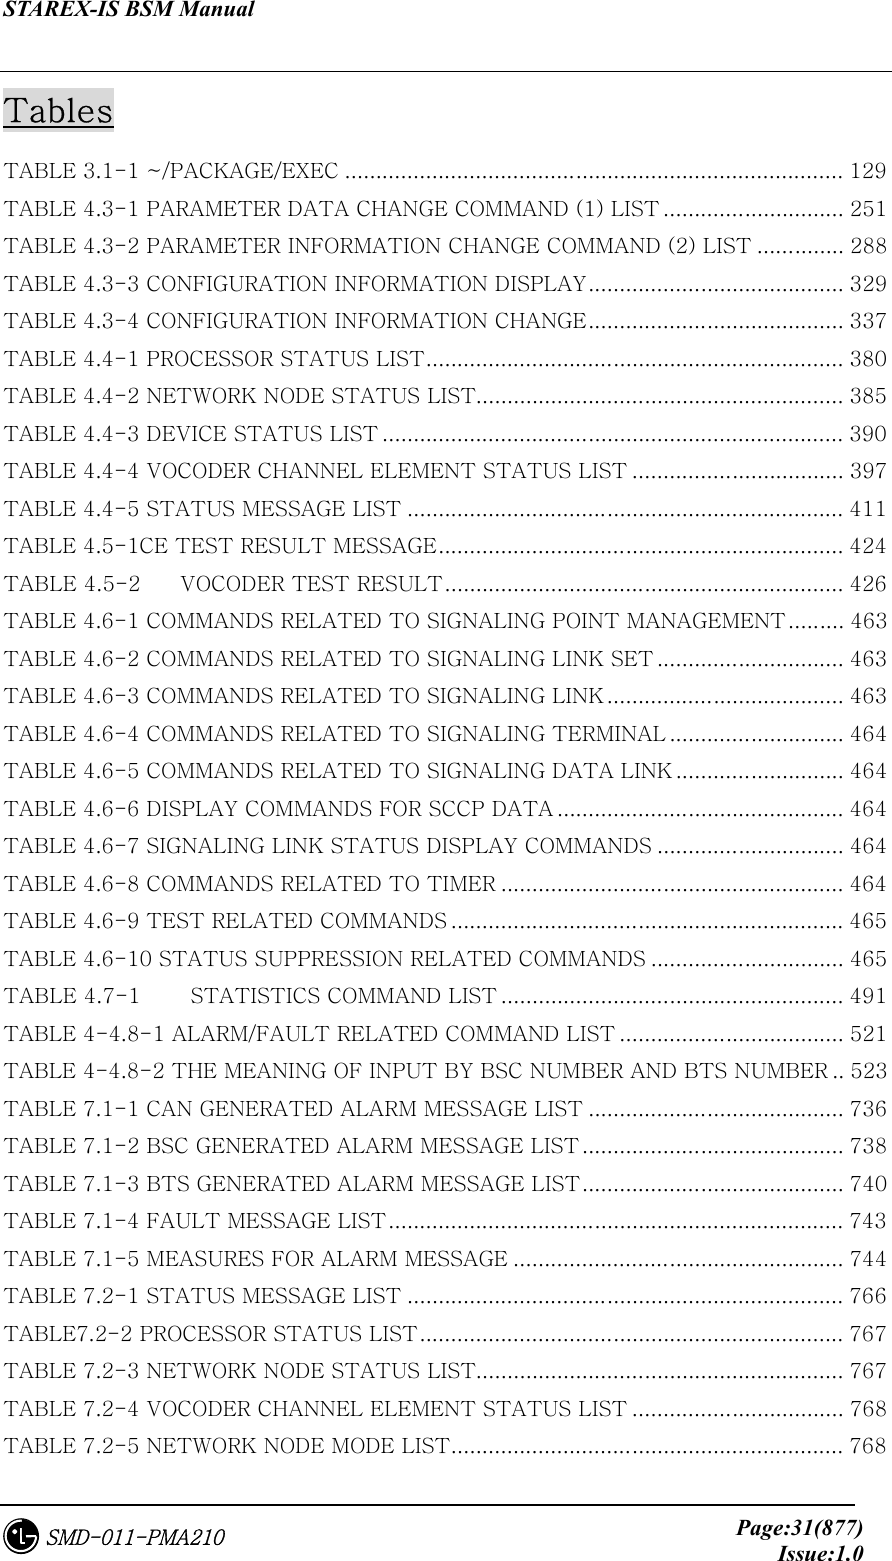 STAREX-IS BSM Manual     Page:31(877)Issue:1.0SMD-011-PMA210 Tables TABLE 3.1-1 ~/PACKAGE/EXEC ................................................................................ 129 TABLE 4.3-1 PARAMETER DATA CHANGE COMMAND (1) LIST ............................. 251 TABLE 4.3-2 PARAMETER INFORMATION CHANGE COMMAND (2) LIST .............. 288 TABLE 4.3-3 CONFIGURATION INFORMATION DISPLAY......................................... 329 TABLE 4.3-4 CONFIGURATION INFORMATION CHANGE......................................... 337 TABLE 4.4-1 PROCESSOR STATUS LIST................................................................... 380 TABLE 4.4-2 NETWORK NODE STATUS LIST........................................................... 385 TABLE 4.4-3 DEVICE STATUS LIST .......................................................................... 390 TABLE 4.4-4 VOCODER CHANNEL ELEMENT STATUS LIST .................................. 397 TABLE 4.4-5 STATUS MESSAGE LIST ...................................................................... 411 TABLE 4.5-1CE TEST RESULT MESSAGE................................................................. 424 TABLE 4.5-2  VOCODER TEST RESULT................................................................ 426 TABLE 4.6-1 COMMANDS RELATED TO SIGNALING POINT MANAGEMENT......... 463 TABLE 4.6-2 COMMANDS RELATED TO SIGNALING LINK SET .............................. 463 TABLE 4.6-3 COMMANDS RELATED TO SIGNALING LINK ...................................... 463 TABLE 4.6-4 COMMANDS RELATED TO SIGNALING TERMINAL ............................ 464 TABLE 4.6-5 COMMANDS RELATED TO SIGNALING DATA LINK ........................... 464 TABLE 4.6-6 DISPLAY COMMANDS FOR SCCP DATA .............................................. 464 TABLE 4.6-7 SIGNALING LINK STATUS DISPLAY COMMANDS .............................. 464 TABLE 4.6-8 COMMANDS RELATED TO TIMER ....................................................... 464 TABLE 4.6-9 TEST RELATED COMMANDS ............................................................... 465 TABLE 4.6-10 STATUS SUPPRESSION RELATED COMMANDS ............................... 465 TABLE 4.7-1    STATISTICS COMMAND LIST ....................................................... 491 TABLE 4-4.8-1 ALARM/FAULT RELATED COMMAND LIST .................................... 521 TABLE 4-4.8-2 THE MEANING OF INPUT BY BSC NUMBER AND BTS NUMBER .. 523 TABLE 7.1-1 CAN GENERATED ALARM MESSAGE LIST ......................................... 736 TABLE 7.1-2 BSC GENERATED ALARM MESSAGE LIST.......................................... 738 TABLE 7.1-3 BTS GENERATED ALARM MESSAGE LIST.......................................... 740 TABLE 7.1-4 FAULT MESSAGE LIST......................................................................... 743 TABLE 7.1-5 MEASURES FOR ALARM MESSAGE ..................................................... 744 TABLE 7.2-1 STATUS MESSAGE LIST ...................................................................... 766 TABLE7.2-2 PROCESSOR STATUS LIST.................................................................... 767 TABLE 7.2-3 NETWORK NODE STATUS LIST........................................................... 767 TABLE 7.2-4 VOCODER CHANNEL ELEMENT STATUS LIST .................................. 768 TABLE 7.2-5 NETWORK NODE MODE LIST............................................................... 768 